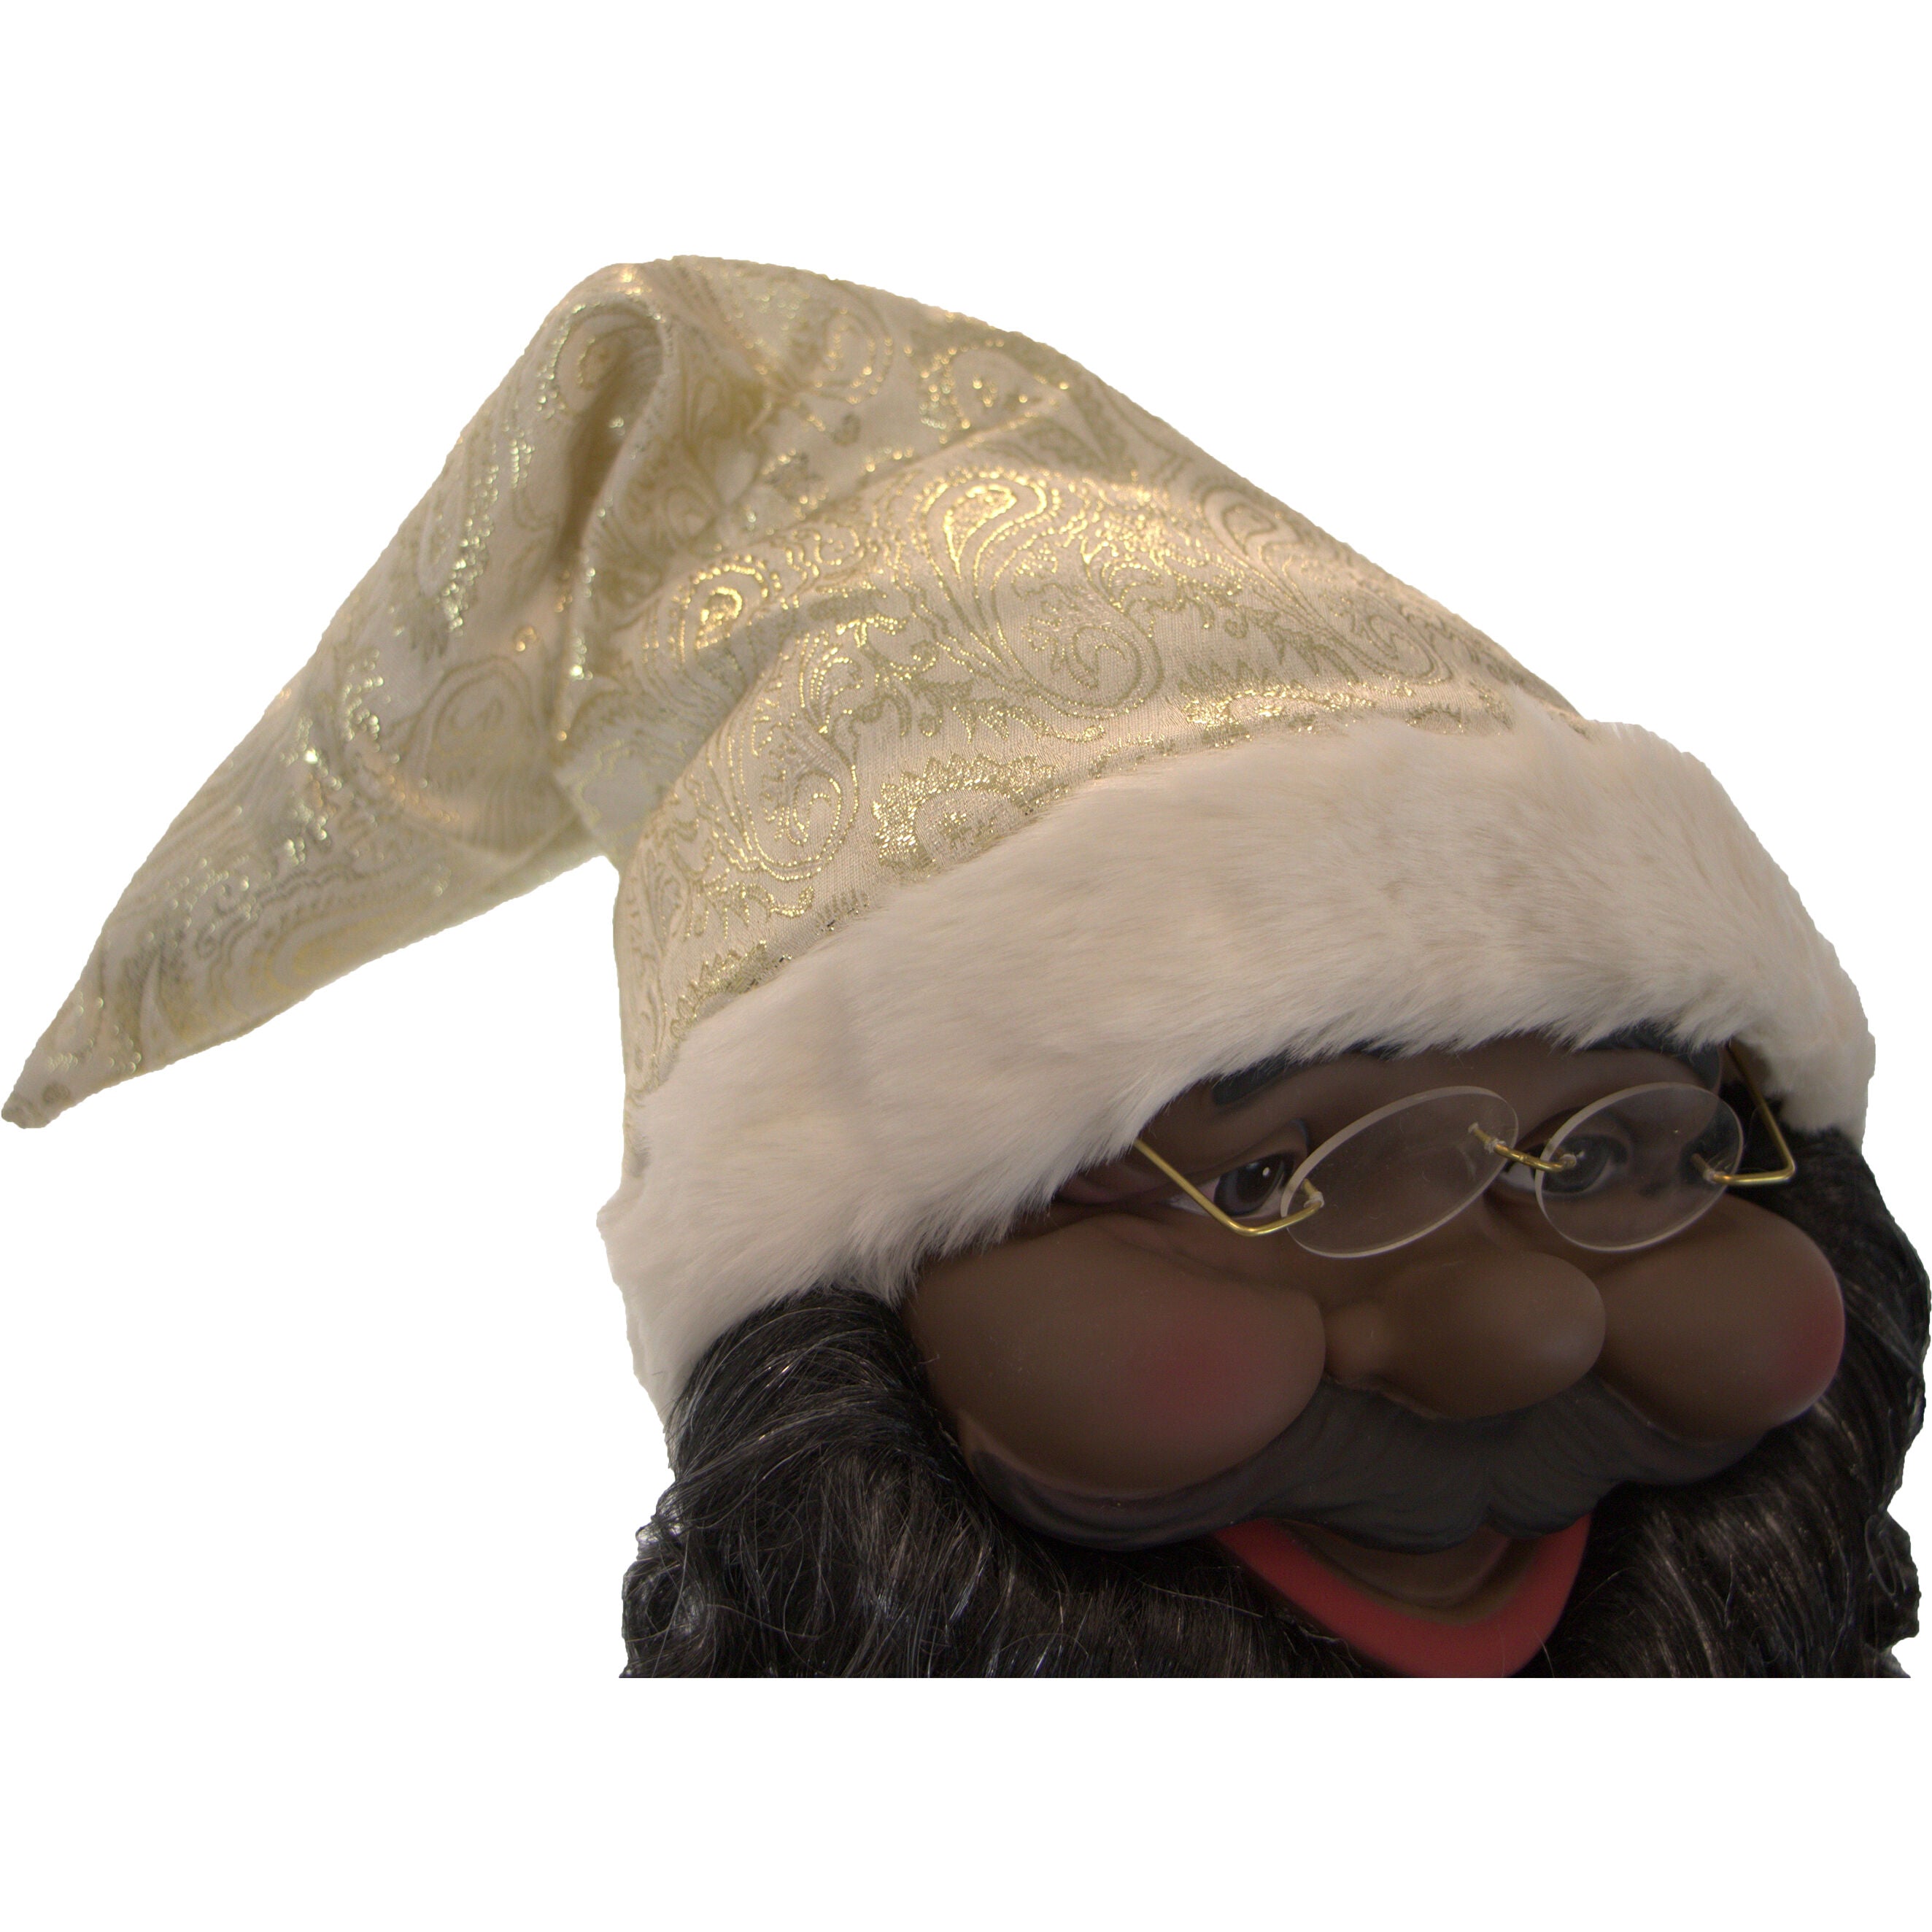 Fraser Hill Farm -  3-Ft. Music and Motion African American Santa with Prelit Christmas Tree, Christmas Animatronic